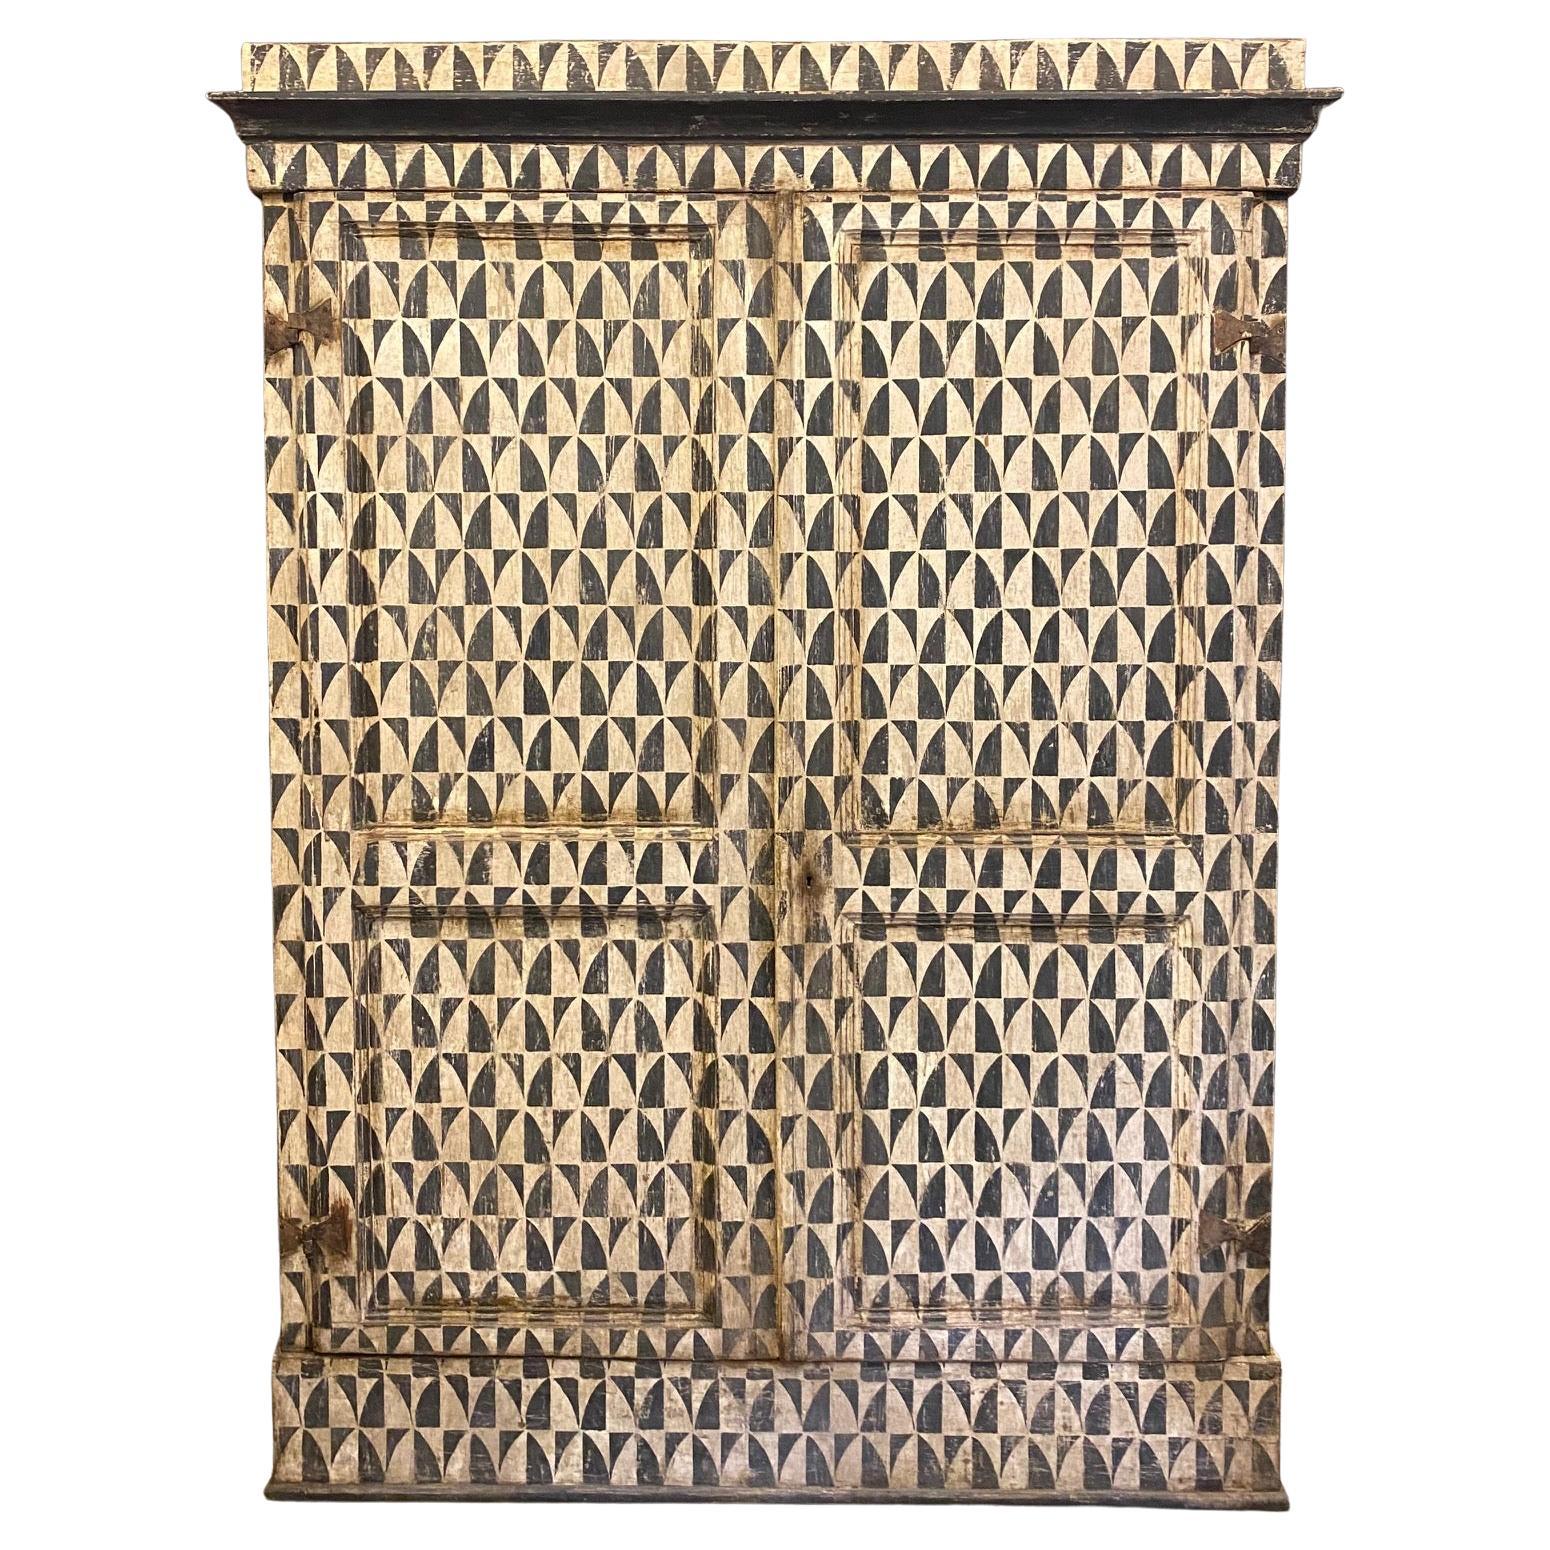 Tessellated Black and White Cabinet, Italy, 19th Century